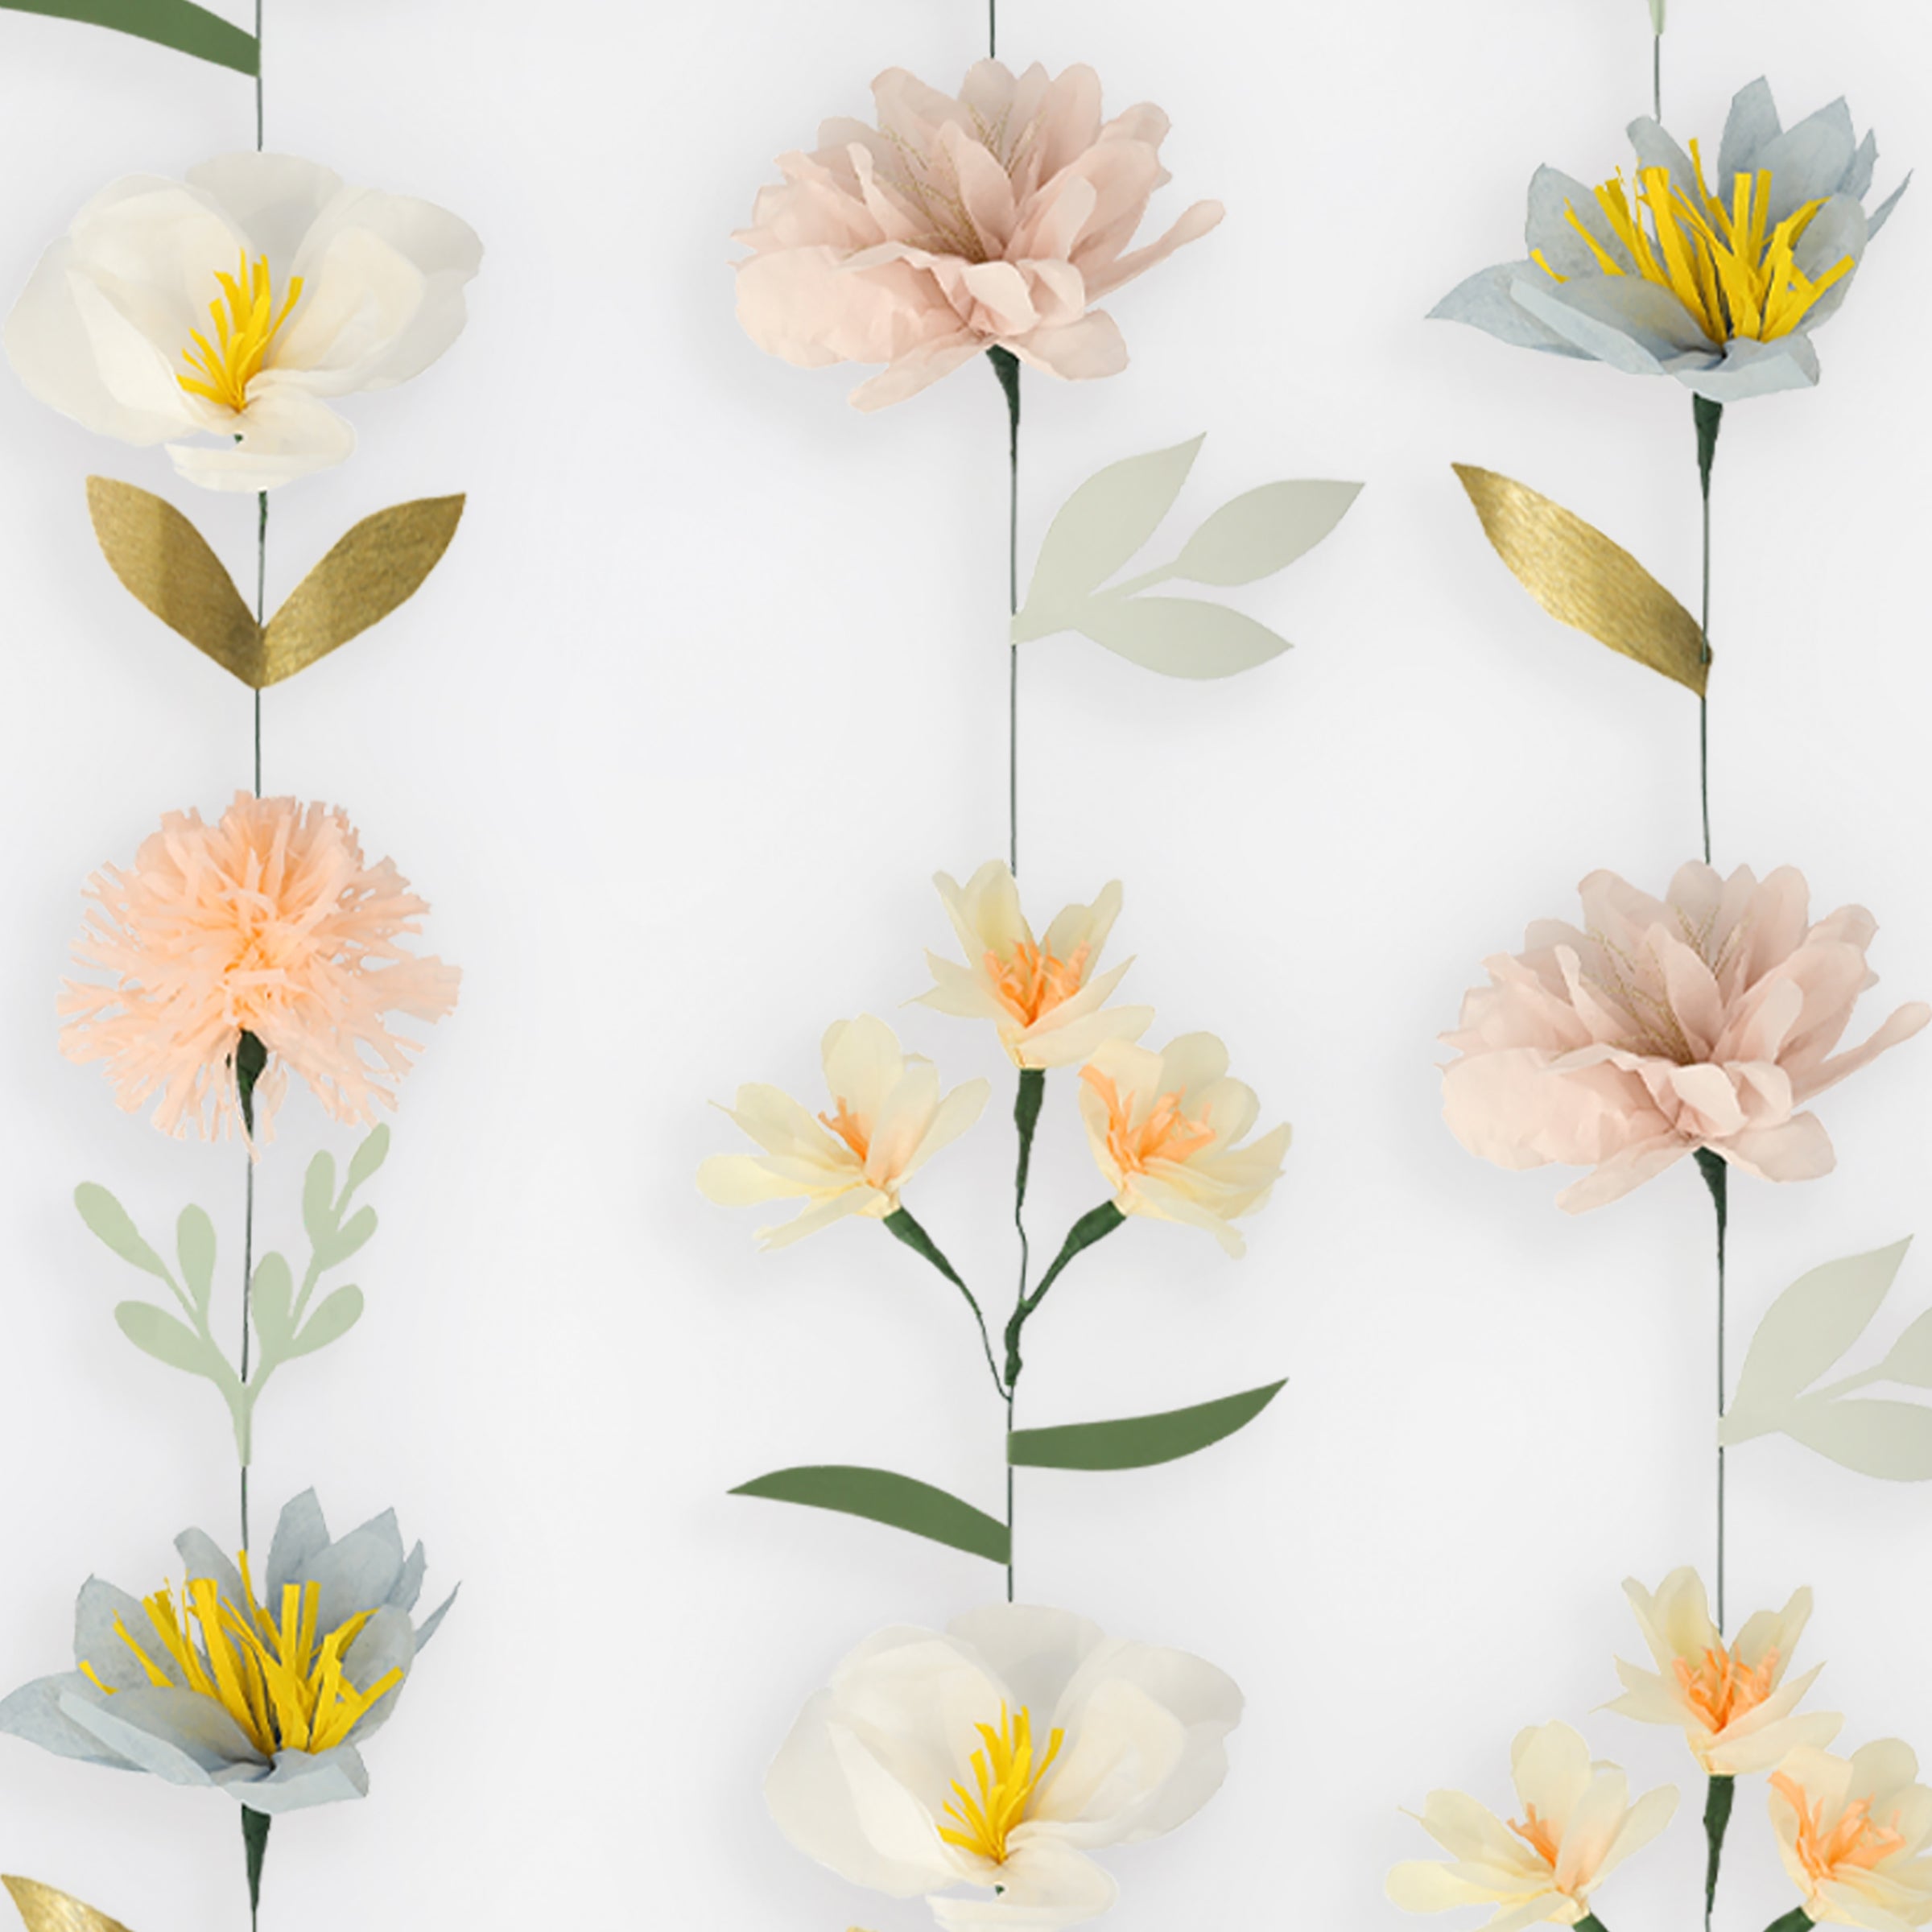 Beautiful tissue paper flowers make an amazing wall decoration.